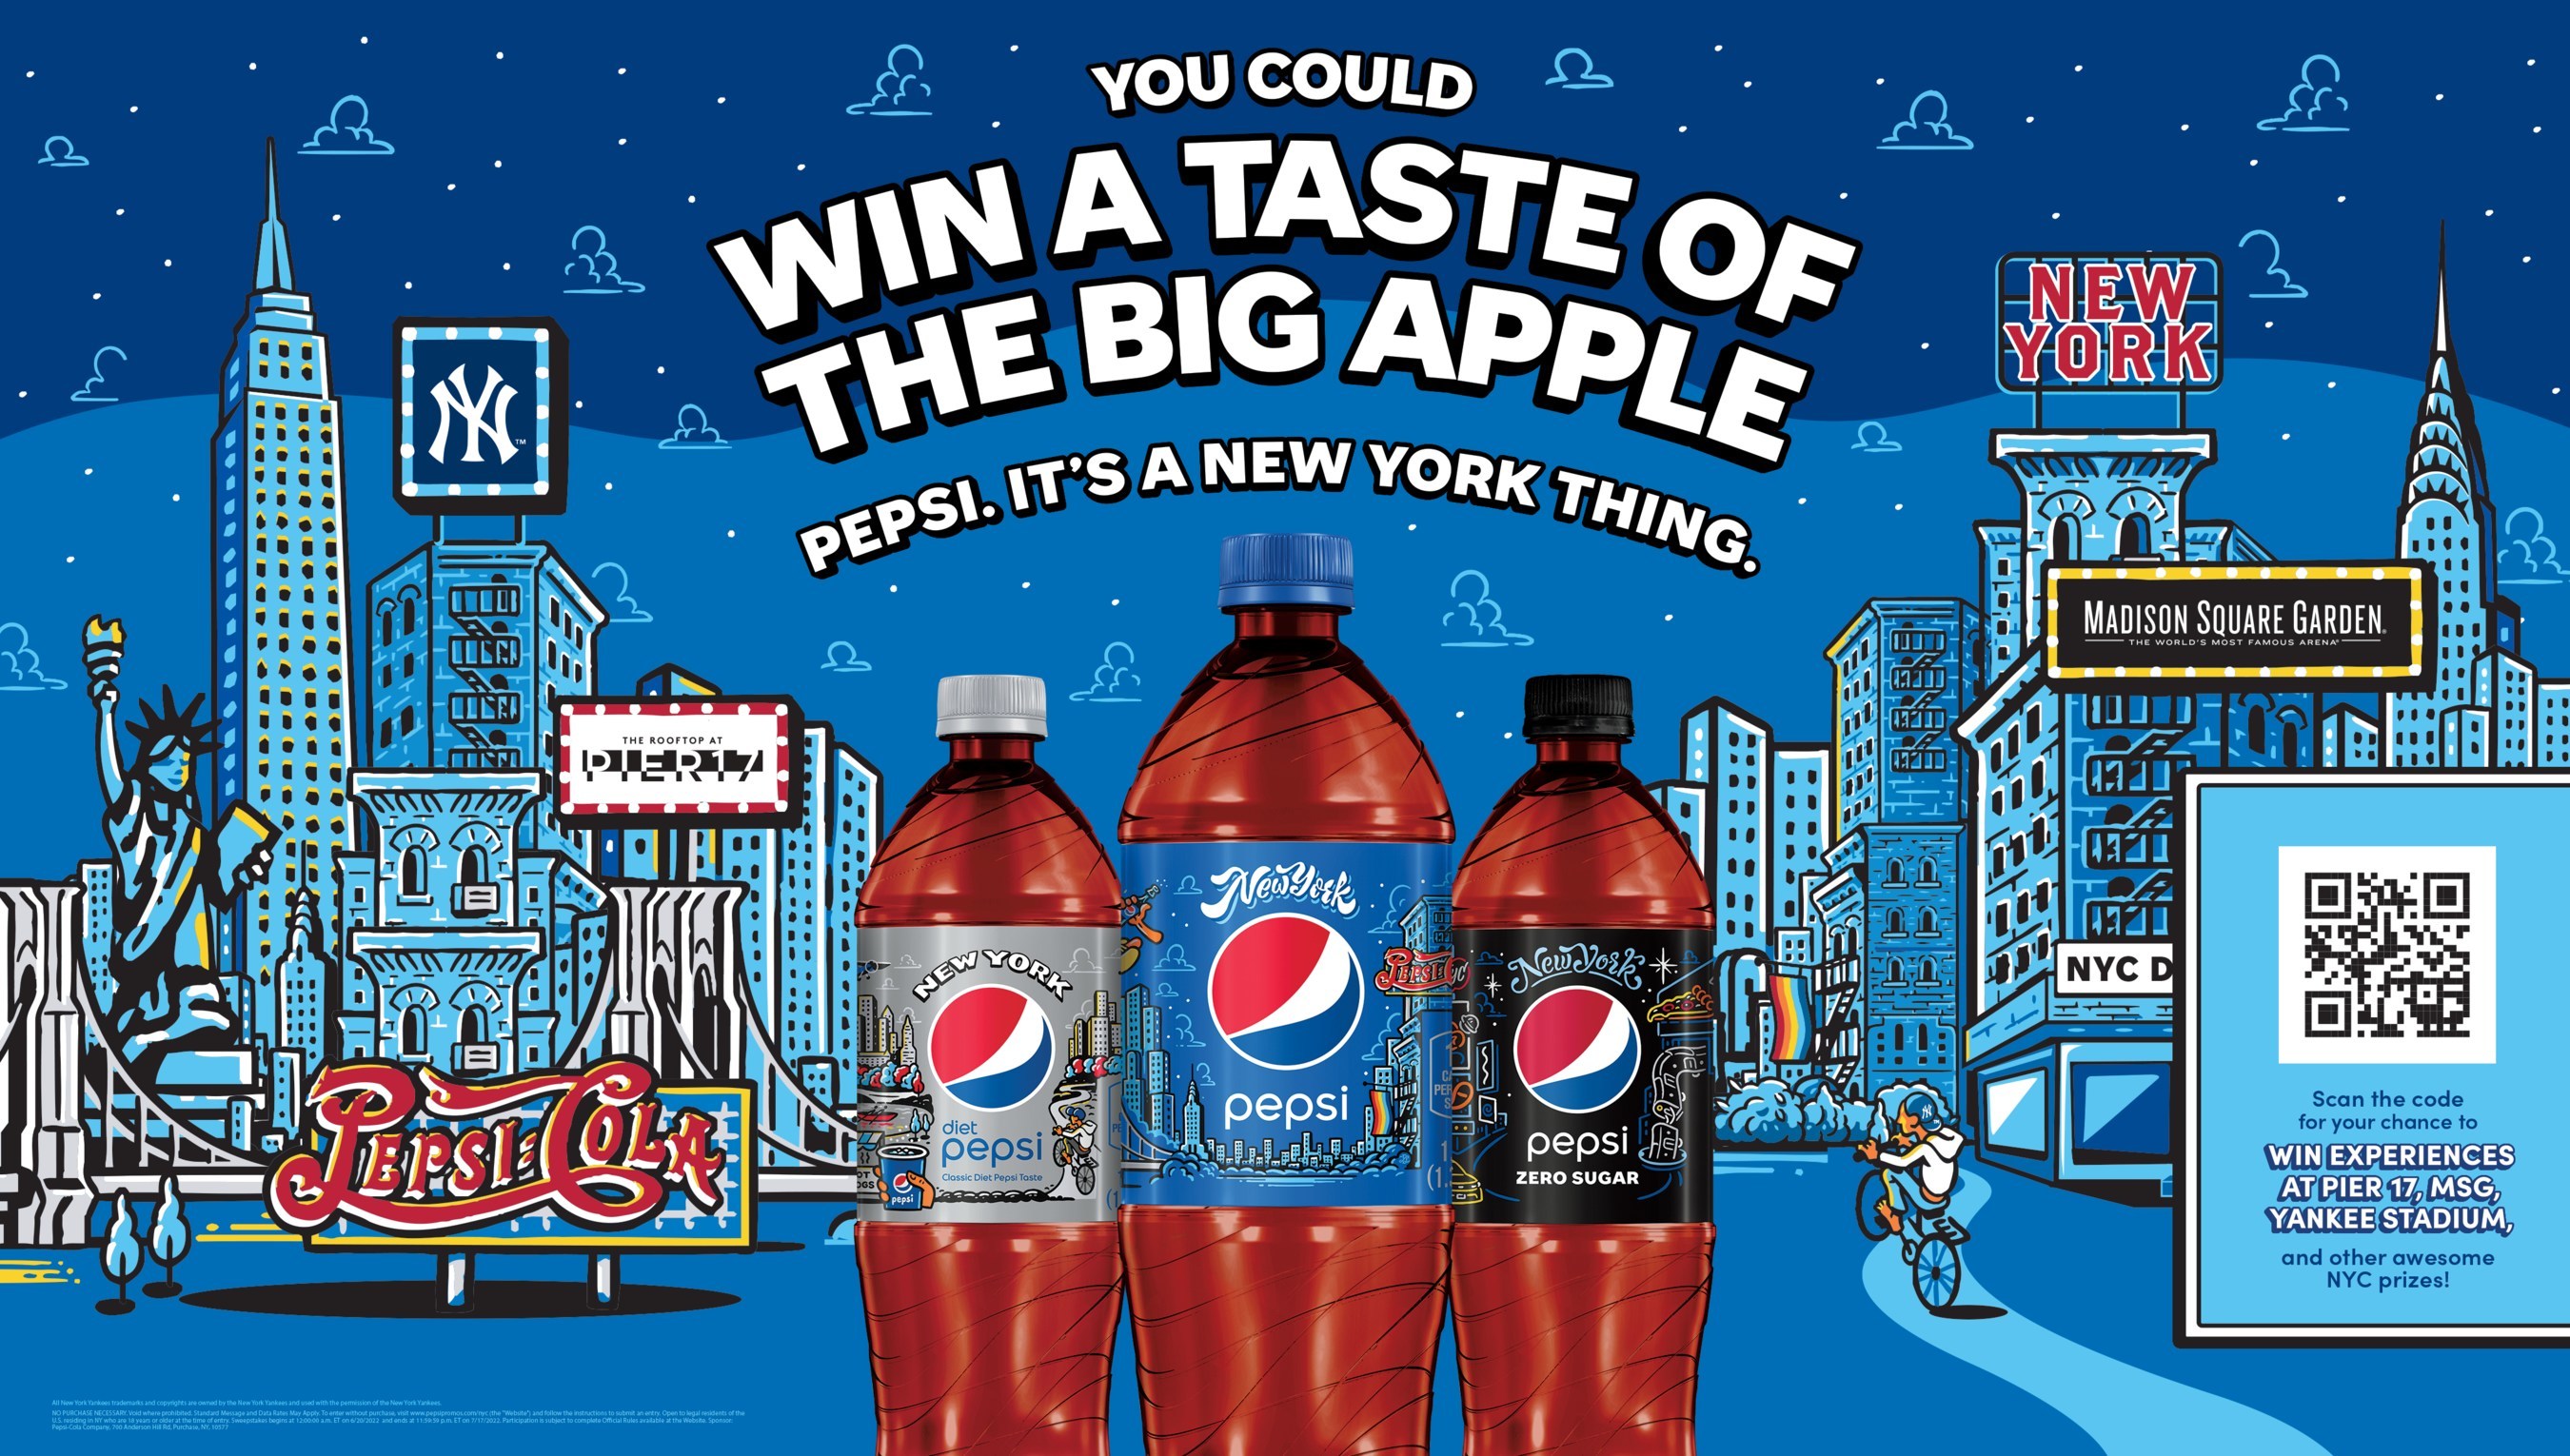 To kick off the summer, Pepsi is giving New Yorkers the chance to win quintessential Big Apple experiences from the brand's iconic partners across the city including concerts, sporting events, renowned dining and more.